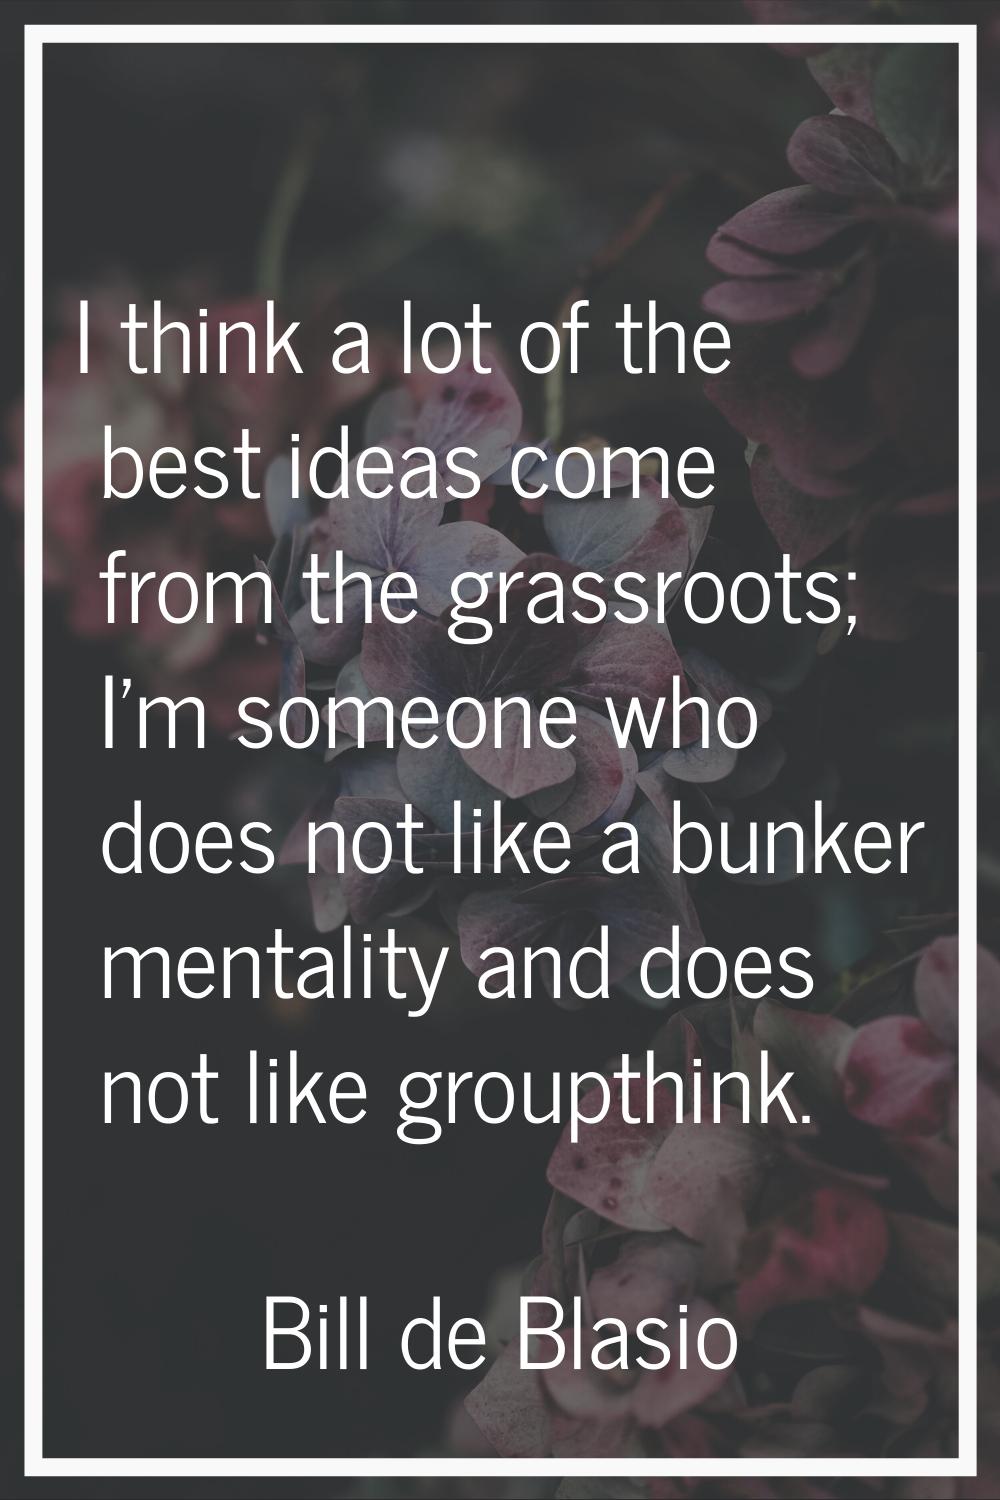 I think a lot of the best ideas come from the grassroots; I'm someone who does not like a bunker me